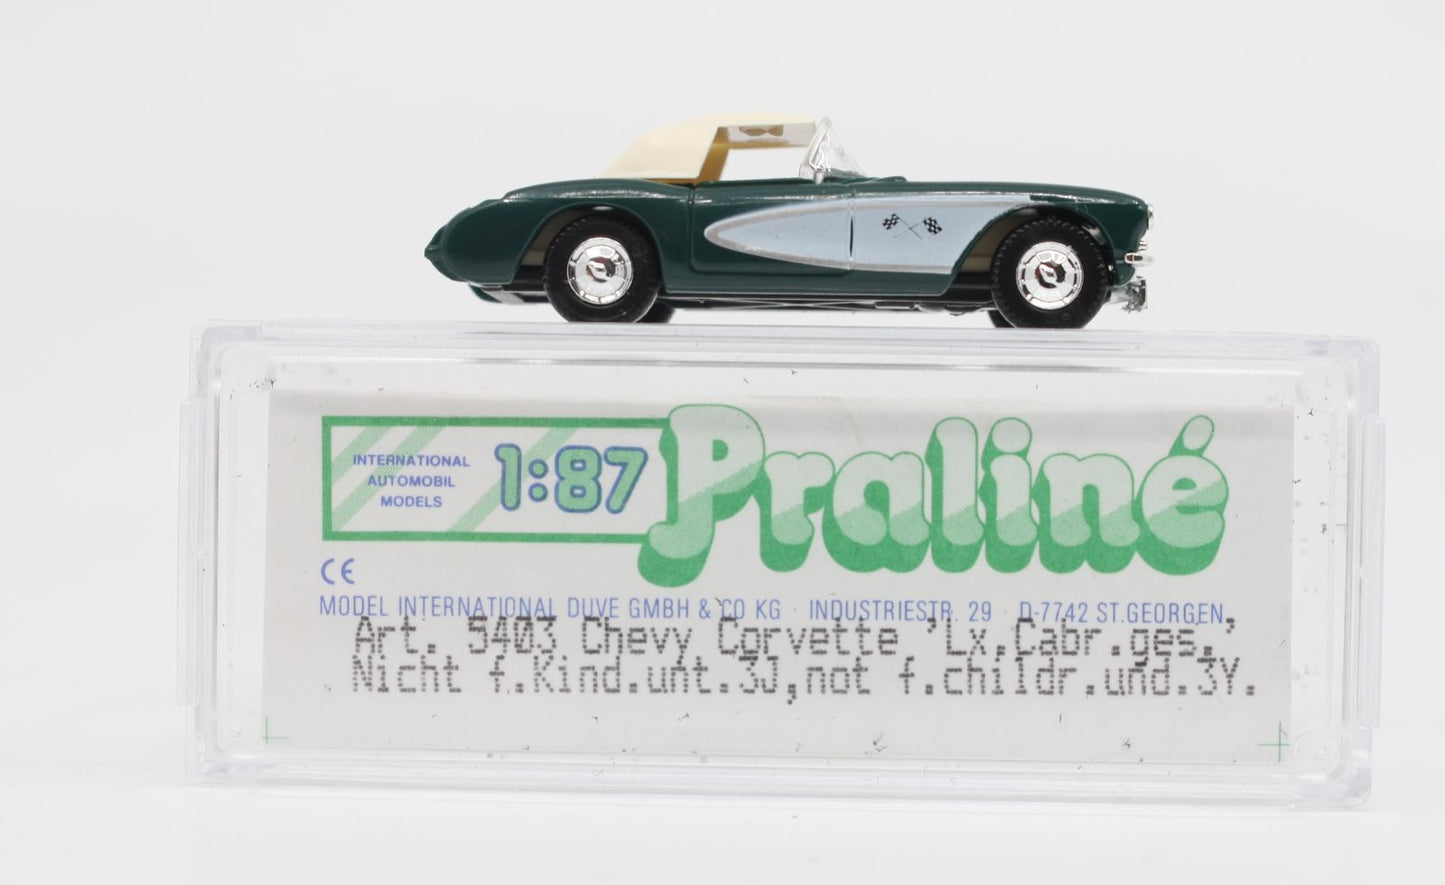 Praline 5403 HO Green Chevy Covrette with White Top